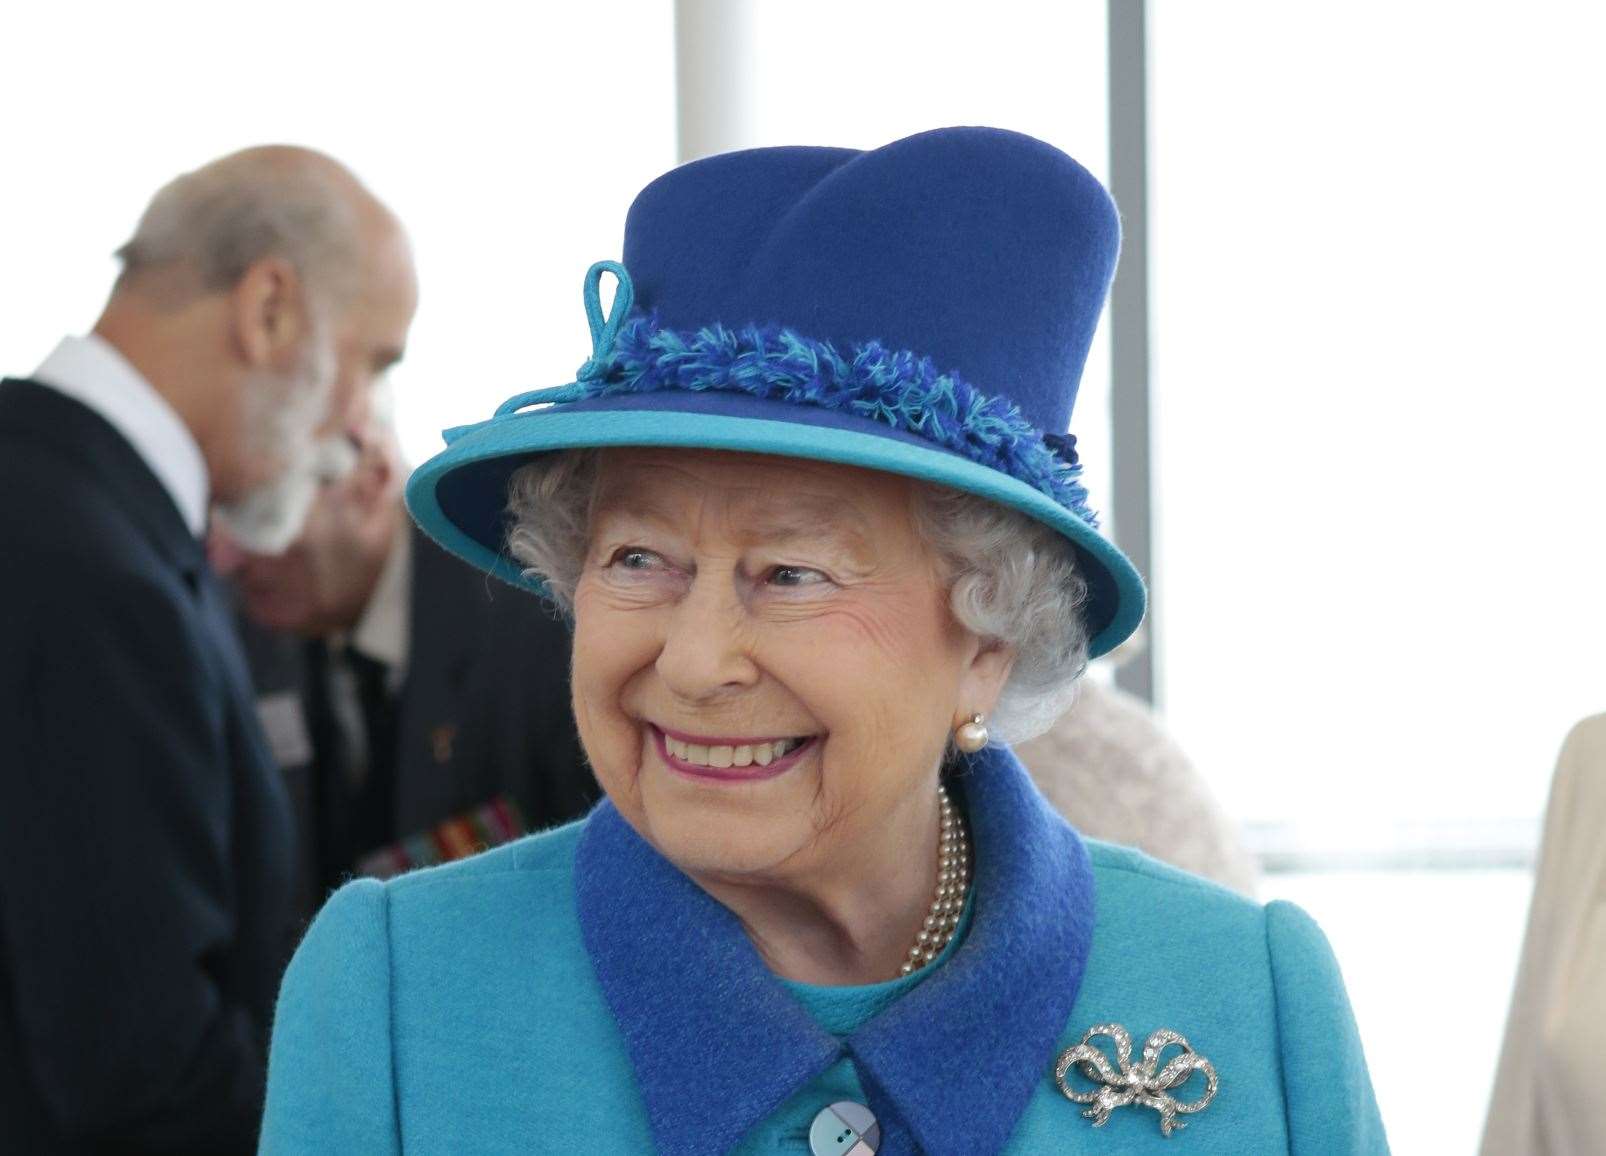 The Queen, pictured in Capel-le-Ferne, near Folkestone, has today received a Covid vaccine at Windsor Castle